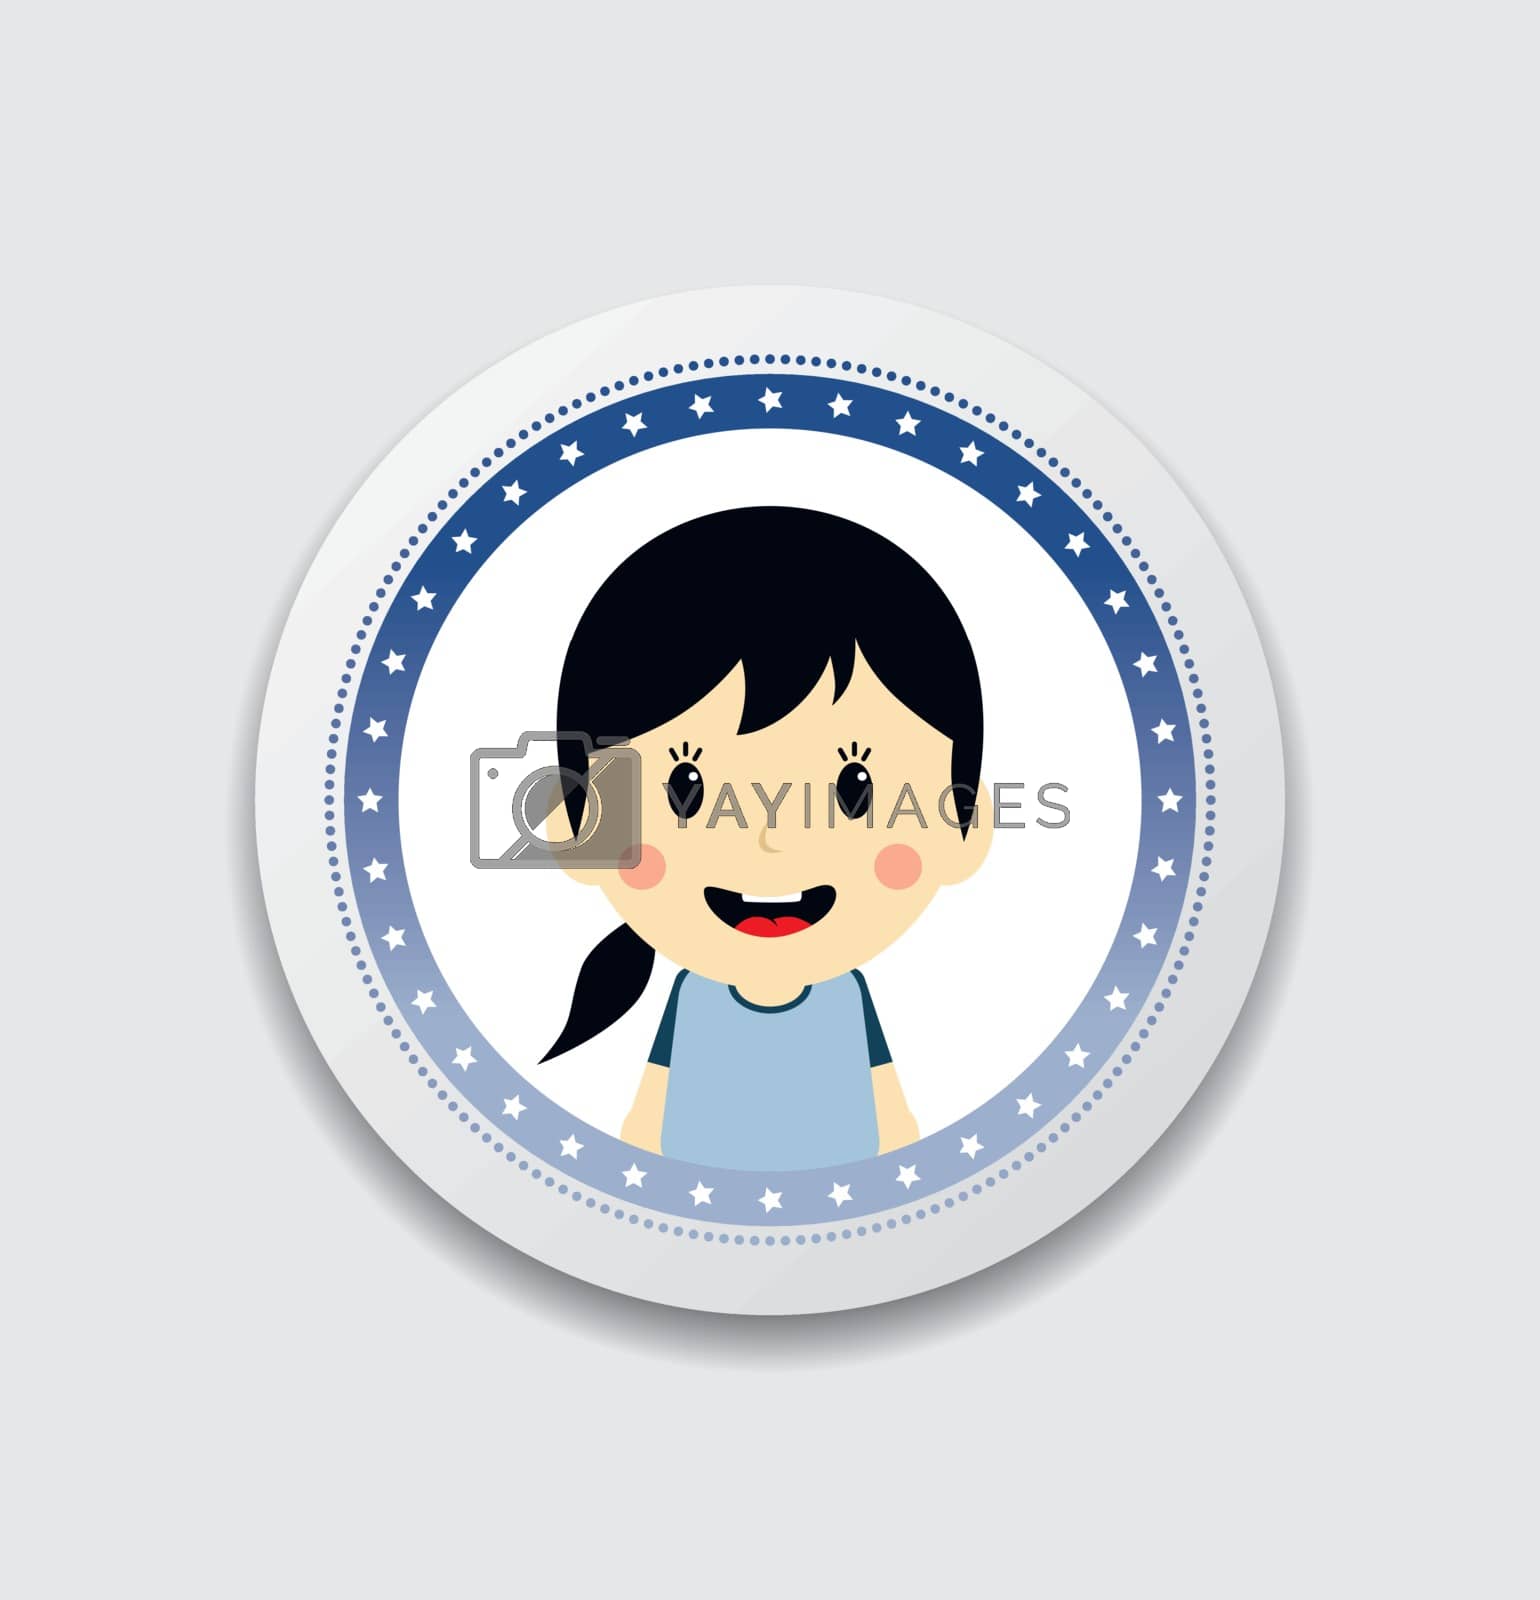 Royalty free image of cute girl cartoon character label by vector1st